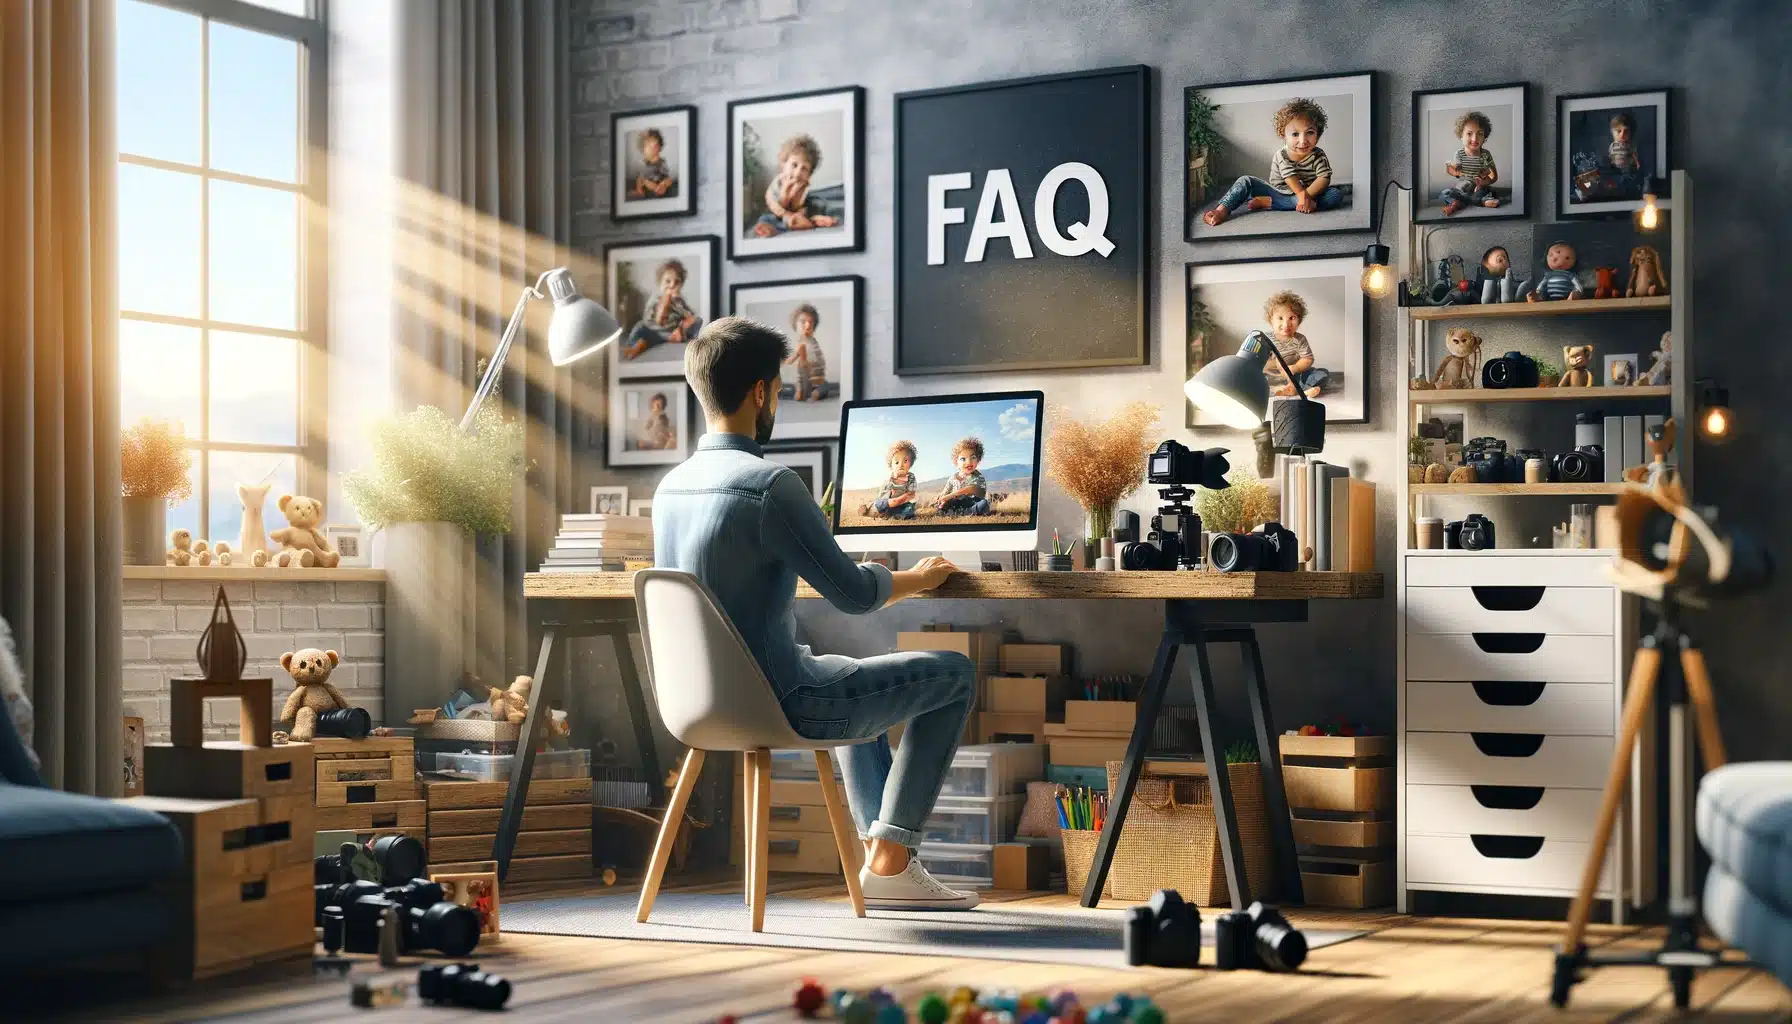 Shooter at a desk with a laptop showing 'FAQ for Adolescence shooting purpose, surrounded by shooting equipment and framed shooter's photos in a well-lit room.